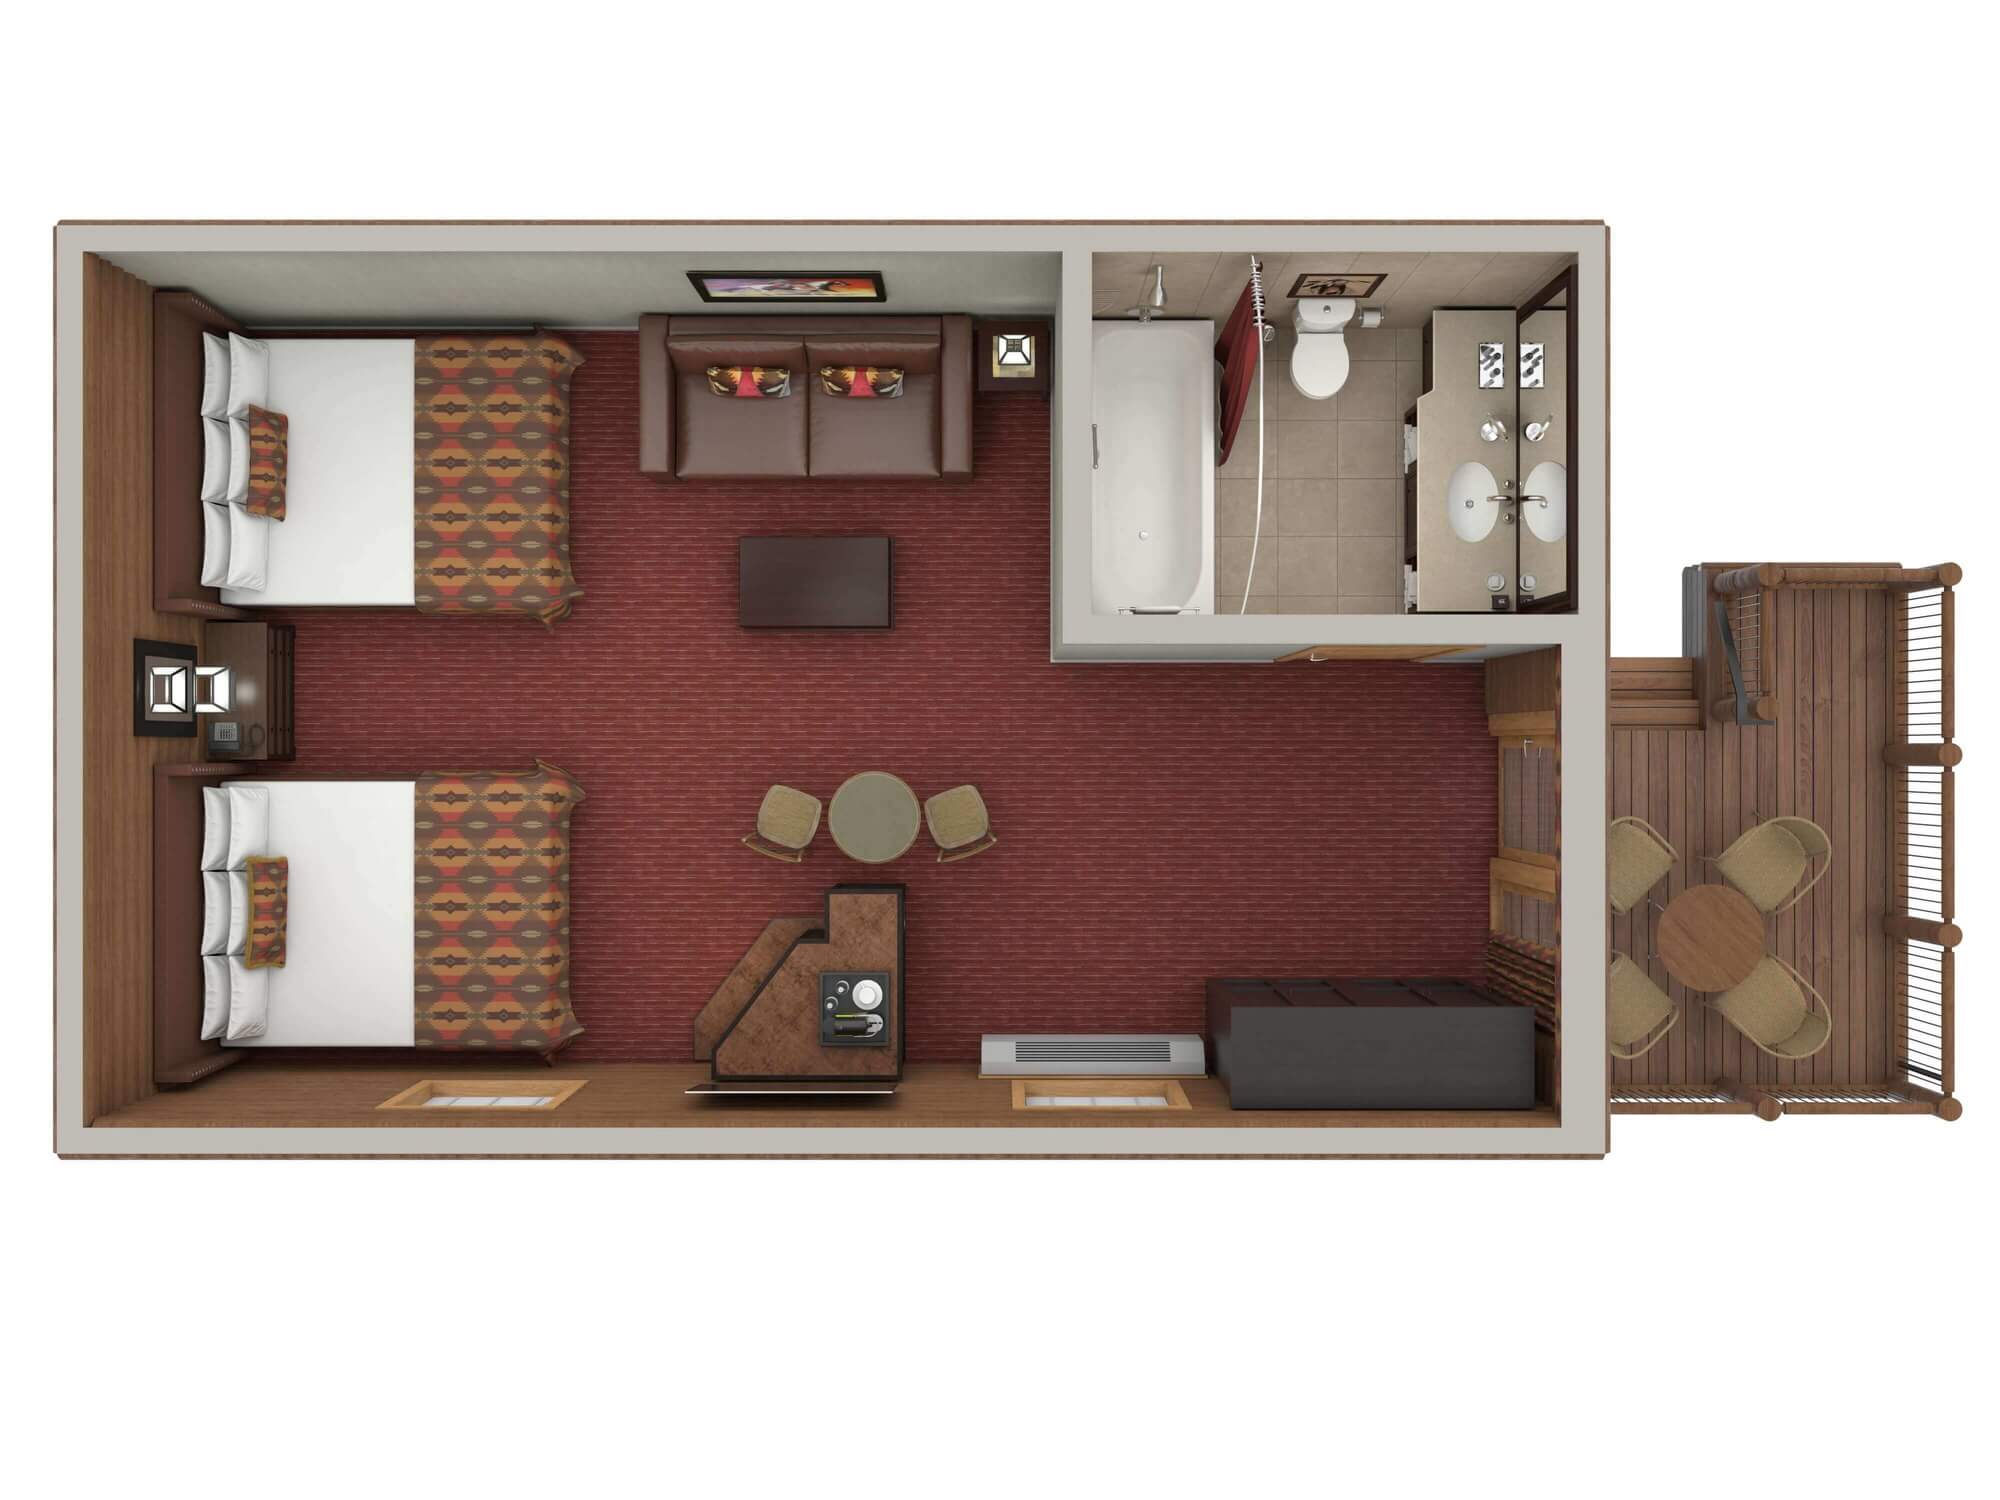 digital image of top down view of luxury cabin with two queen beds and fireplace